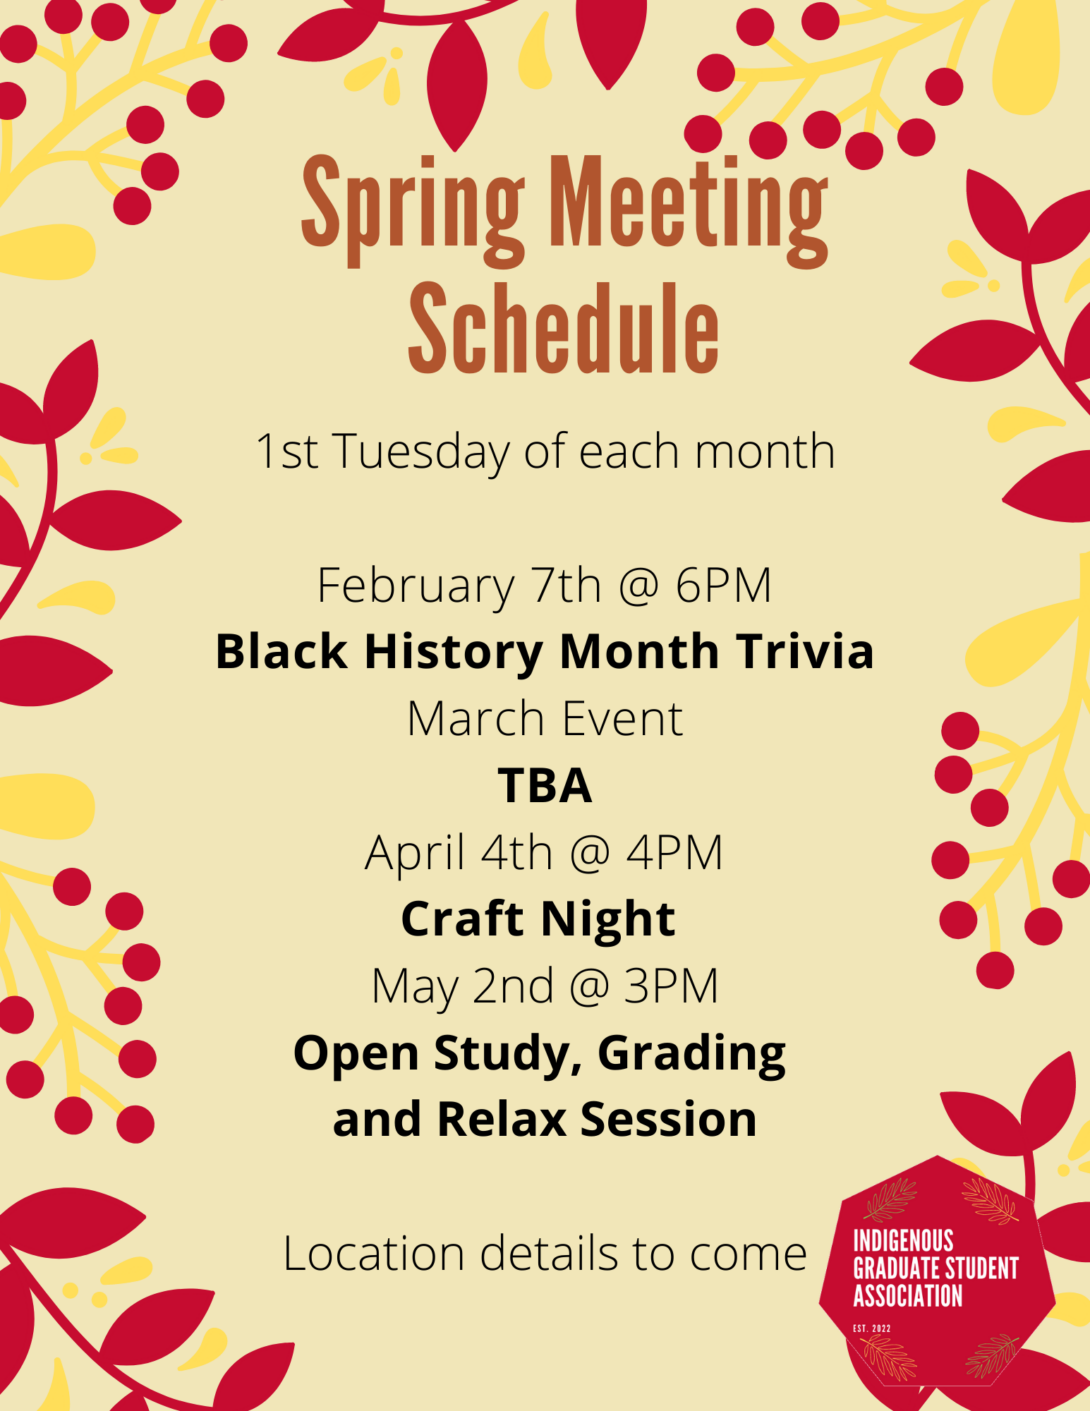 Details of all spring meetings, border is yellow and red flowers and leaves with the IGSA logo in the bottom right corner